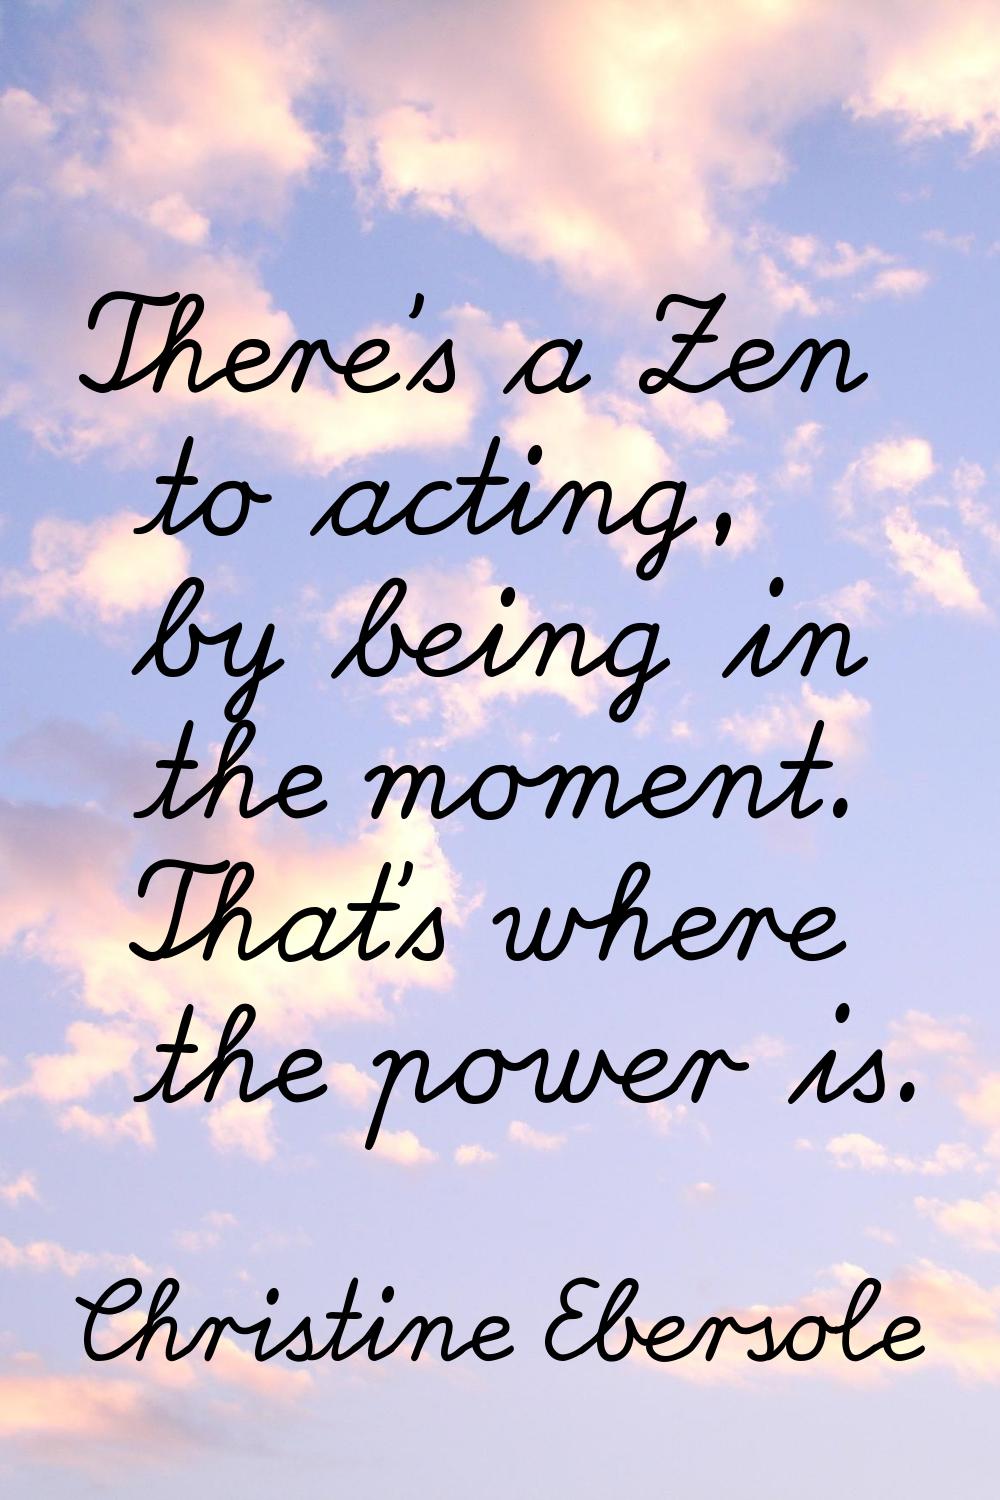 There's a Zen to acting, by being in the moment. That's where the power is.